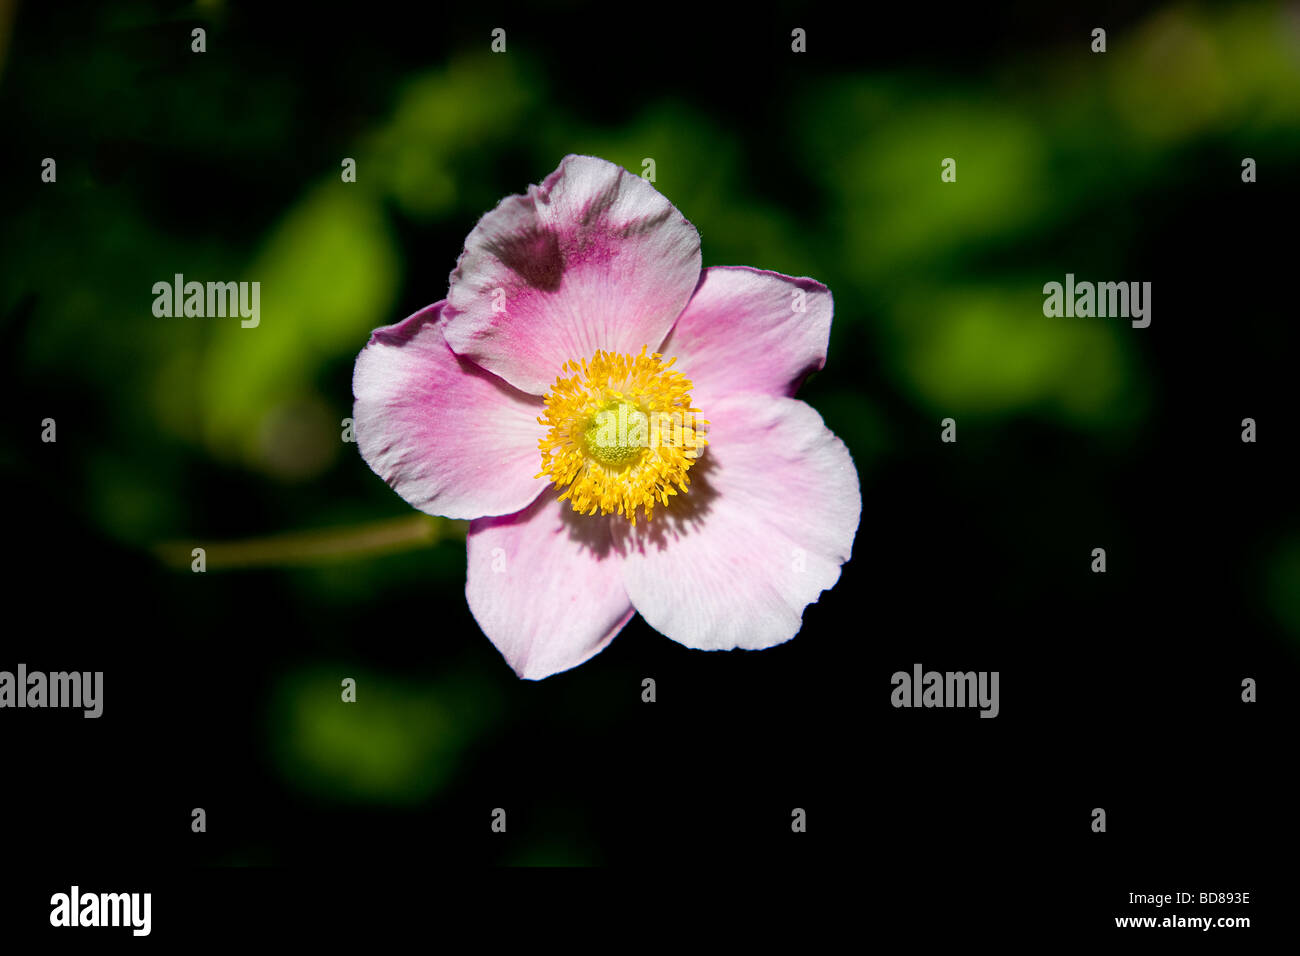 A pink windflower or Japanese Anemone sits in the sun with its greenery shown out of focus and in the shade Stock Photo